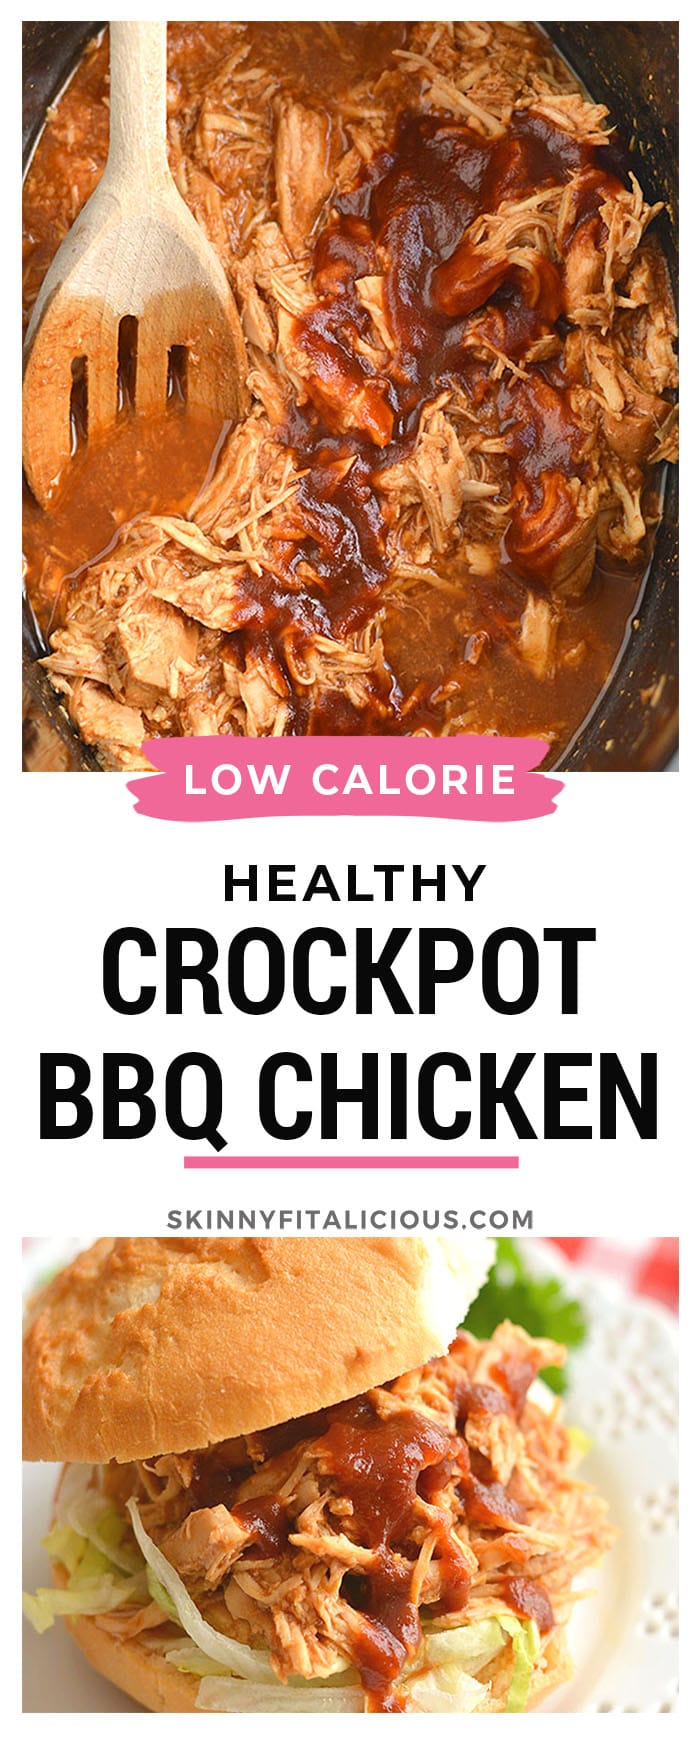 Healthy Crockpot BBQ Chicken recipe is perfect for meal prep for make ahead lunch and dinner. Protein packed and made low in sugar with only 3 ingredients. A healthy meal and the crockpot does all the work!